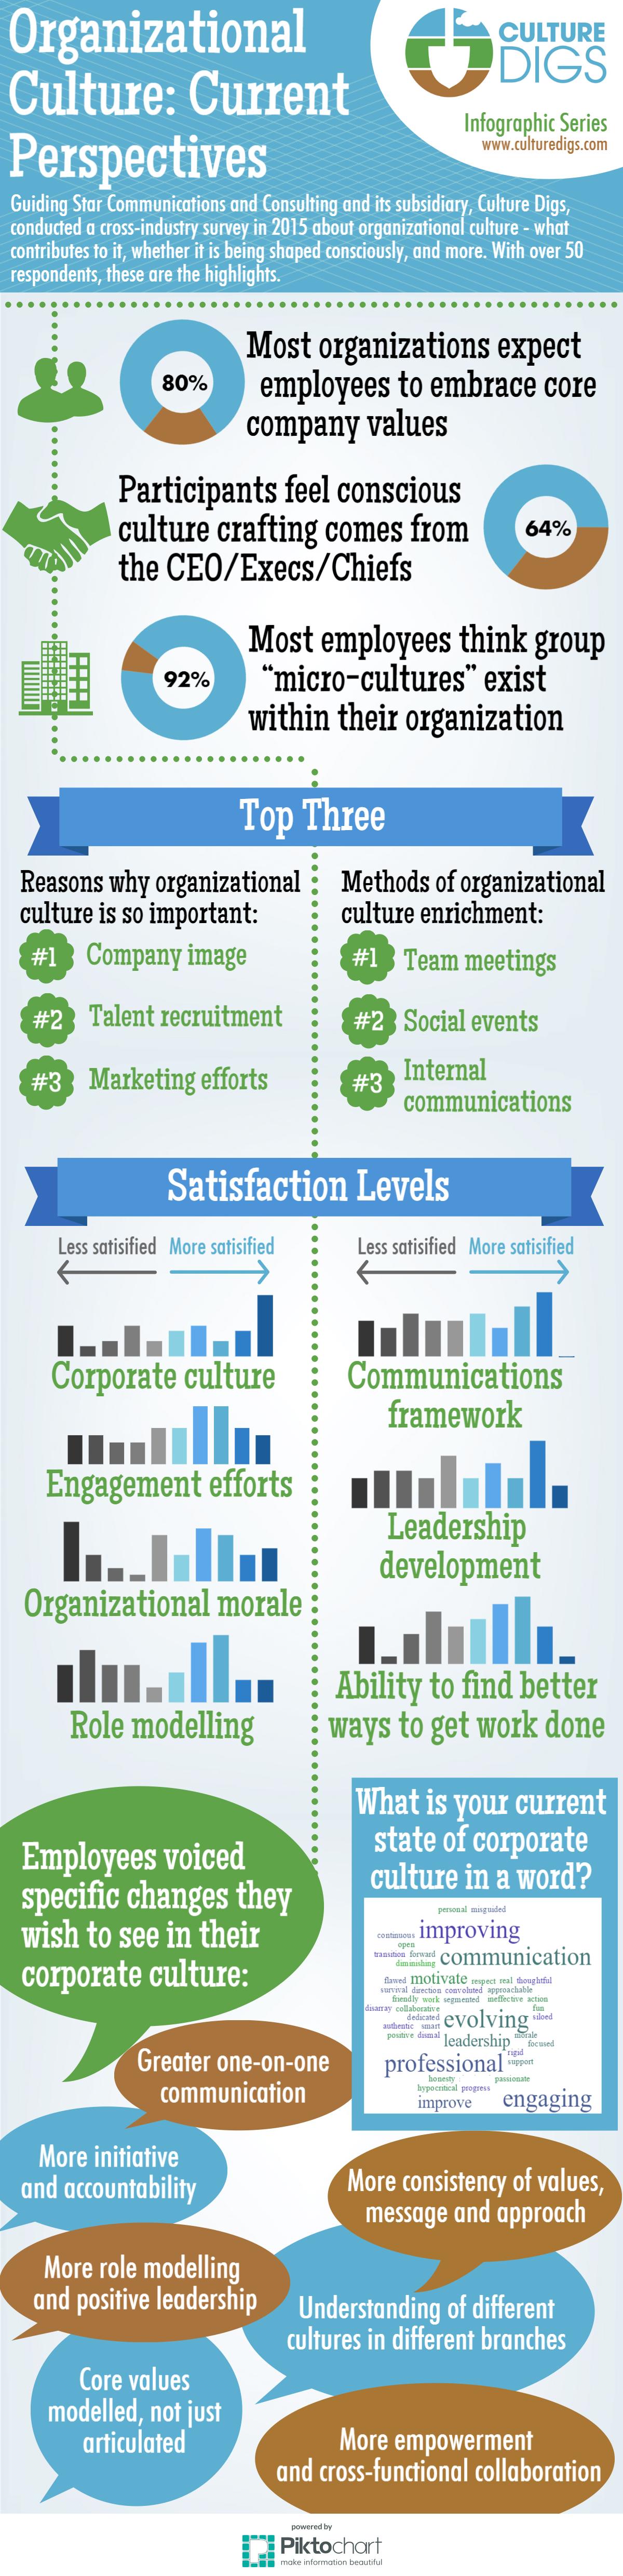 Infographic - Organizational Culture, Global Perspectives